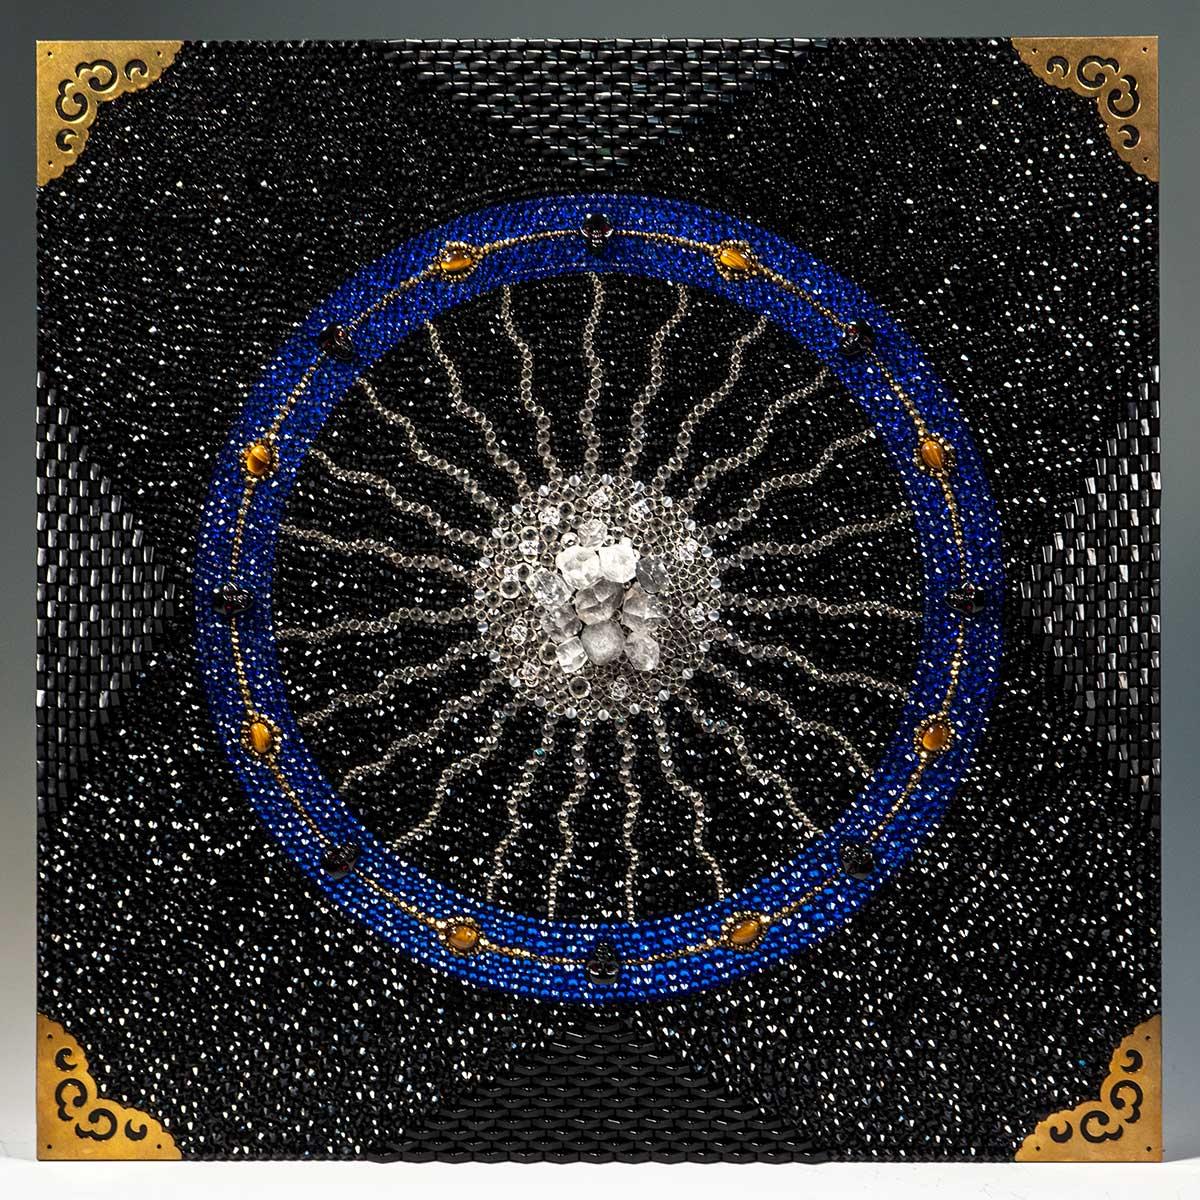 Lawrence Naff's 'Invocation', from 2022, is a Mixed Media work on wood panel measuring 20 x 20 x 1.5 inches. This piece includes Rhinestones, Apophylite, Tiger's Eye, and Cubic Zirconia. Naff's dazzling work includes elements, both natural and